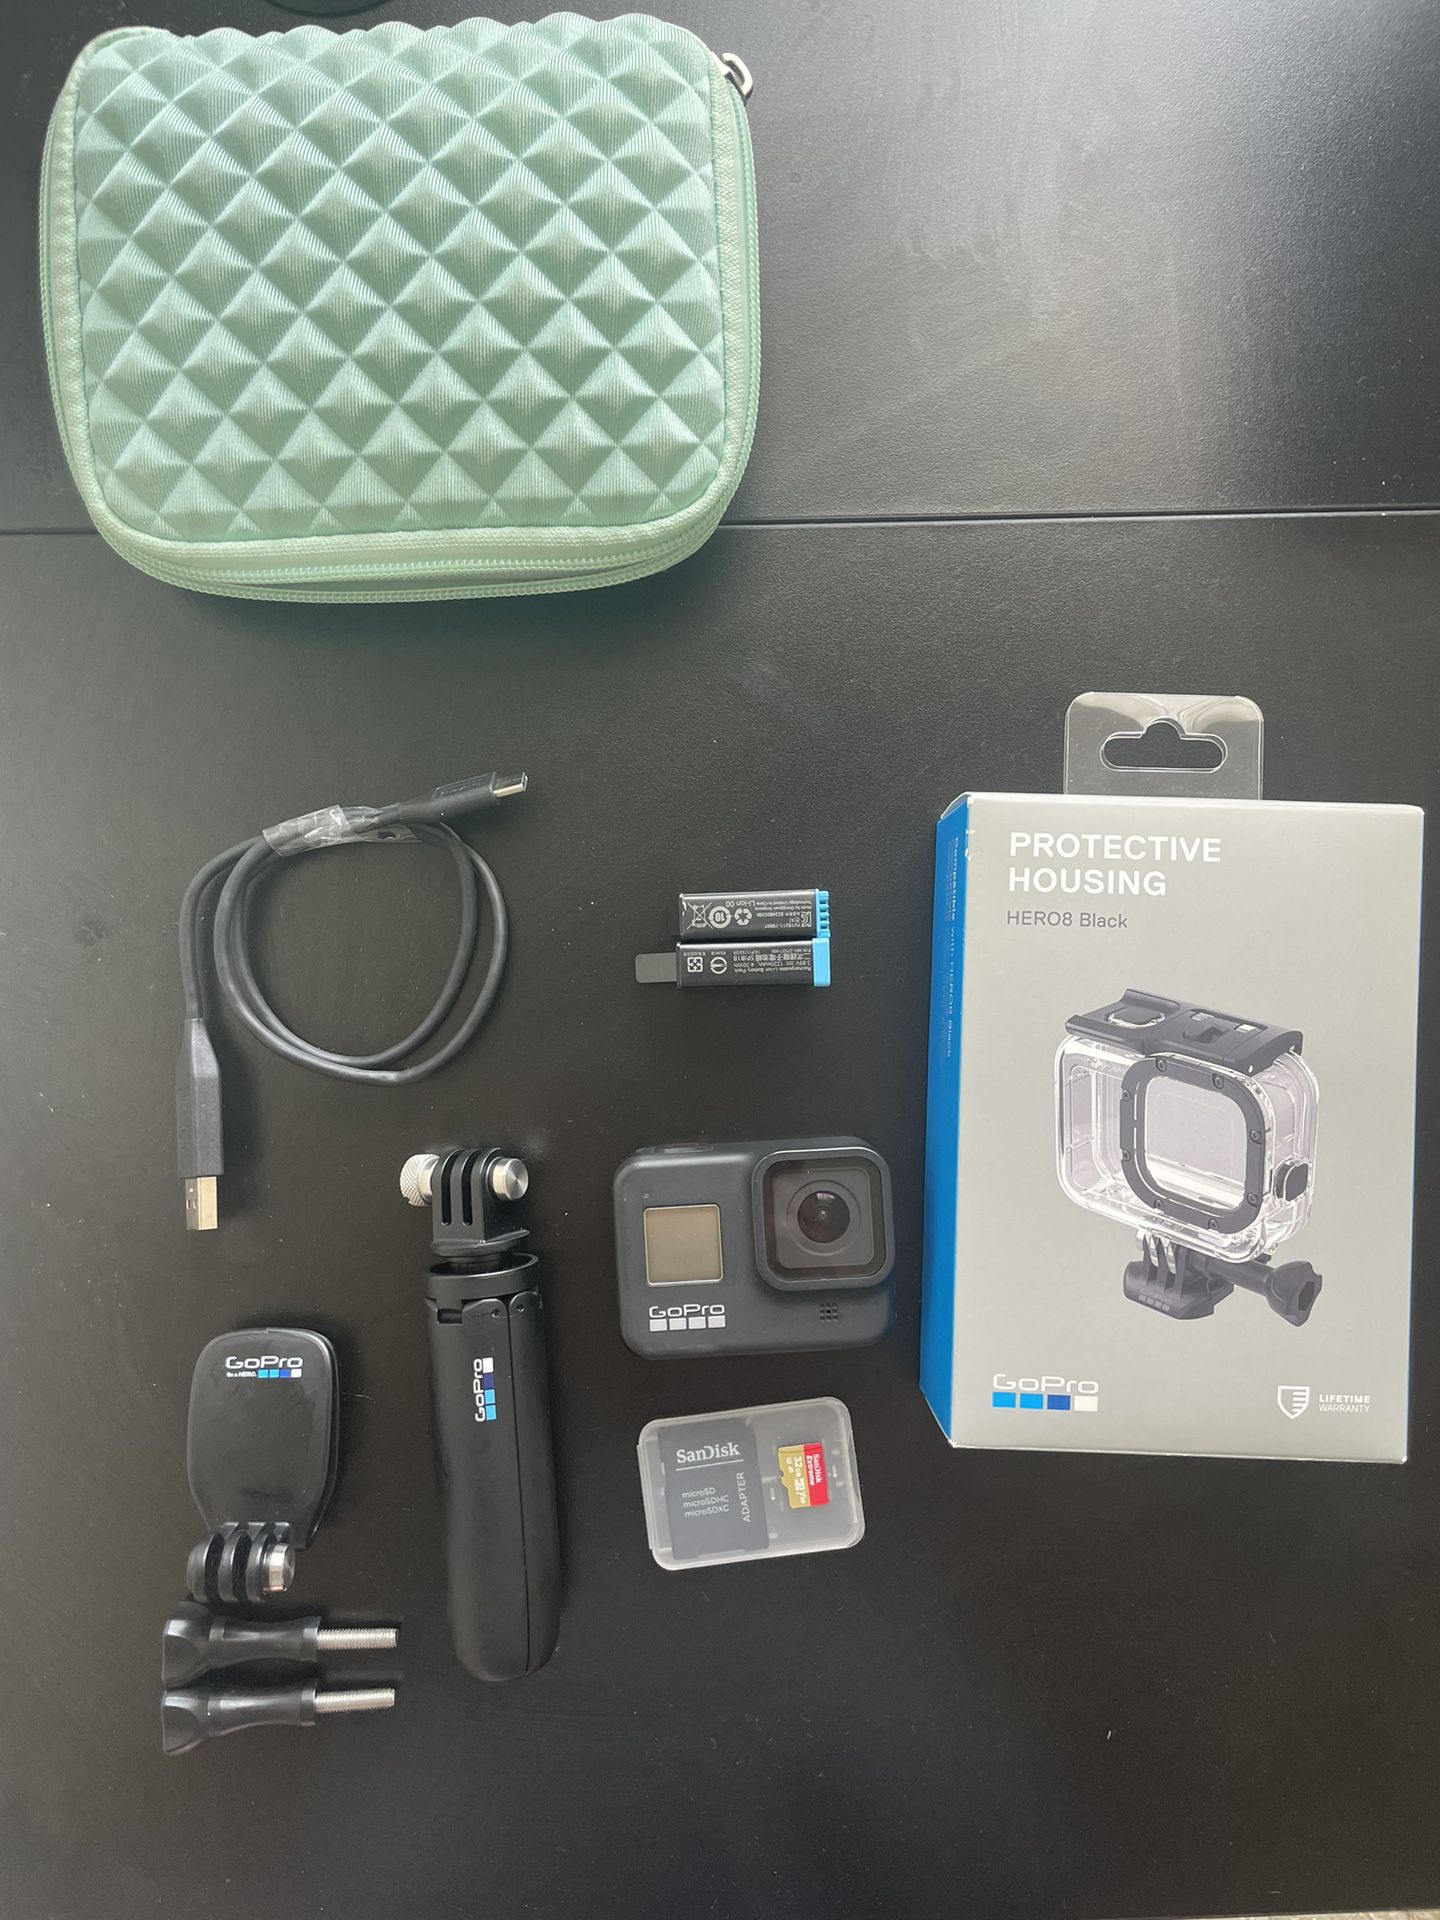 Go Pro 8 With Accessories + New PROTECTIVE HOUSING 